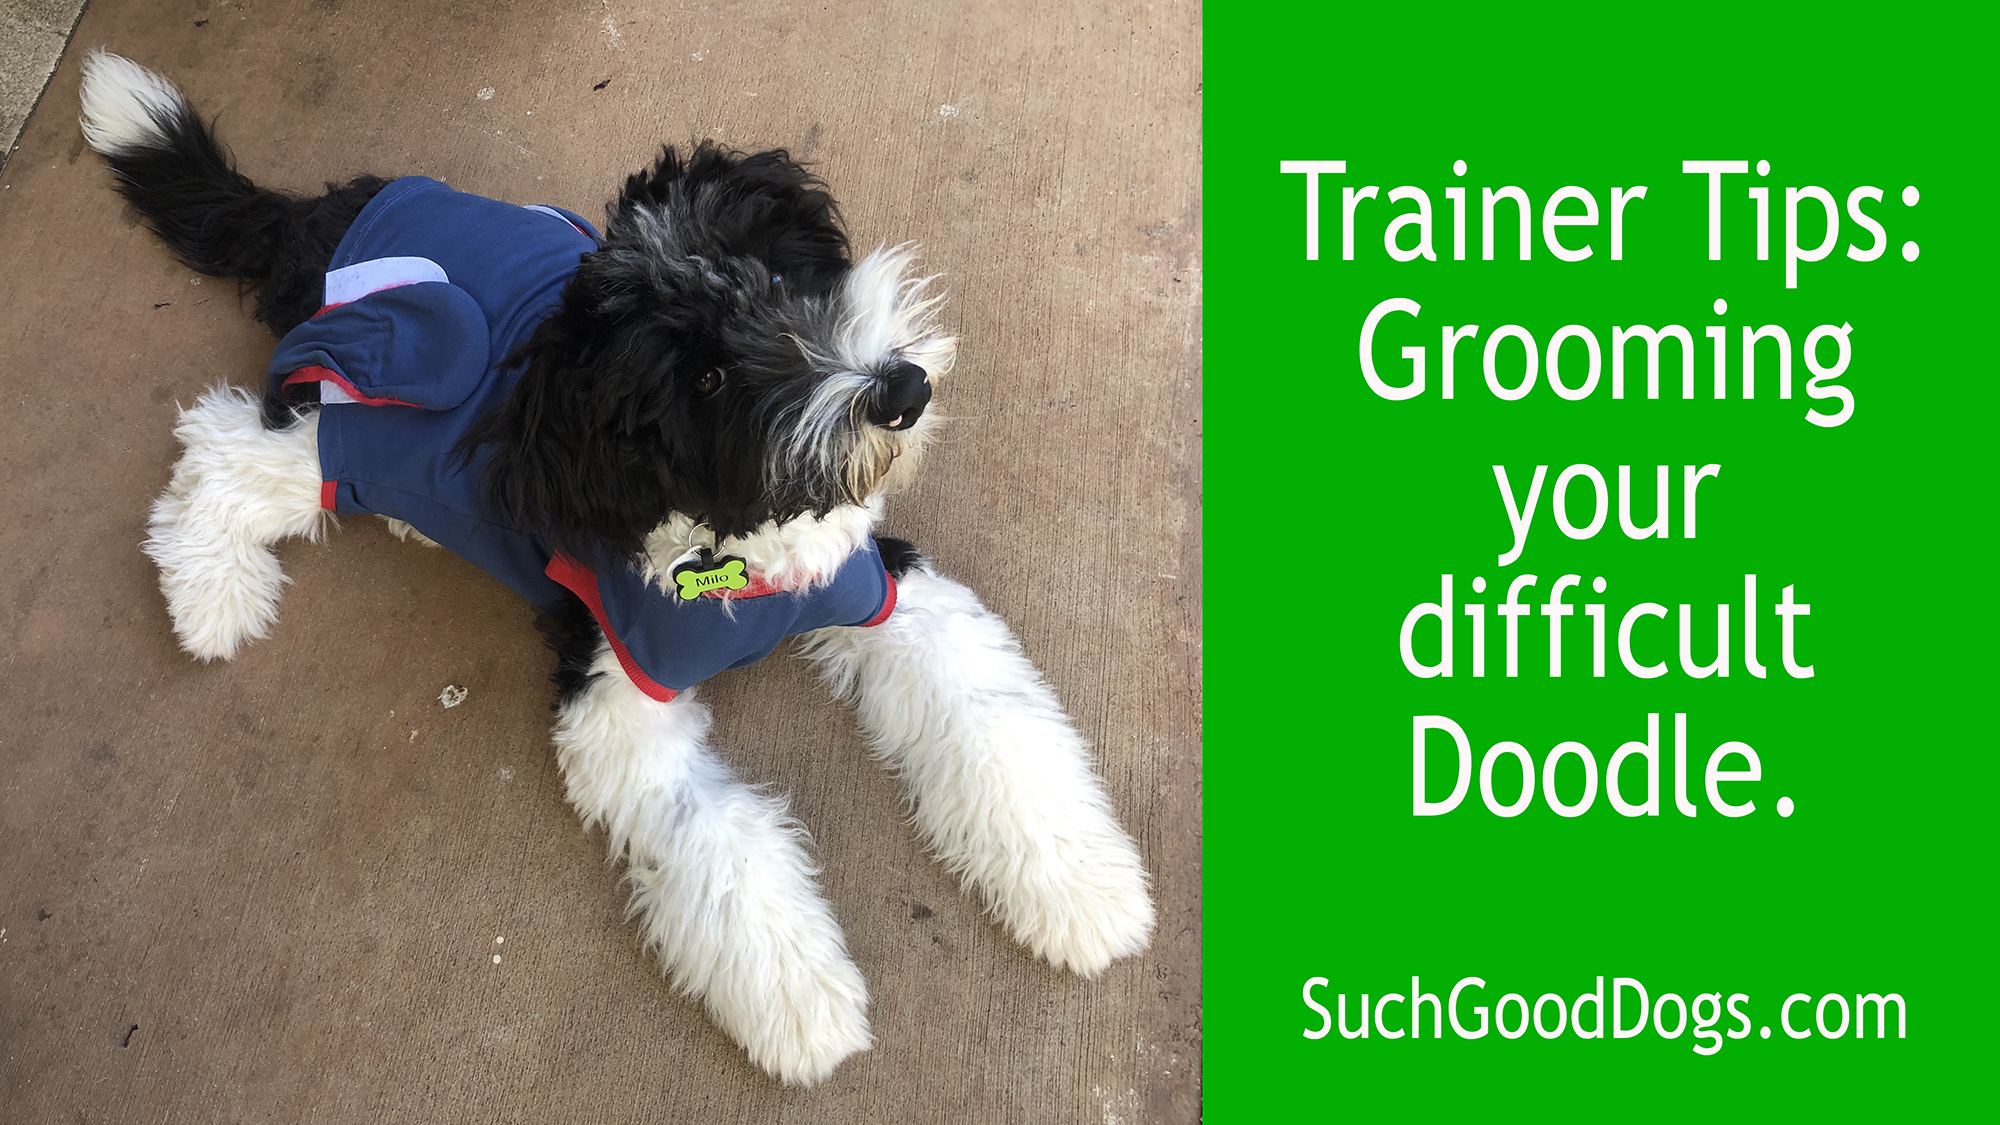 Trainer Tips:  Grooming your difficult Doodle